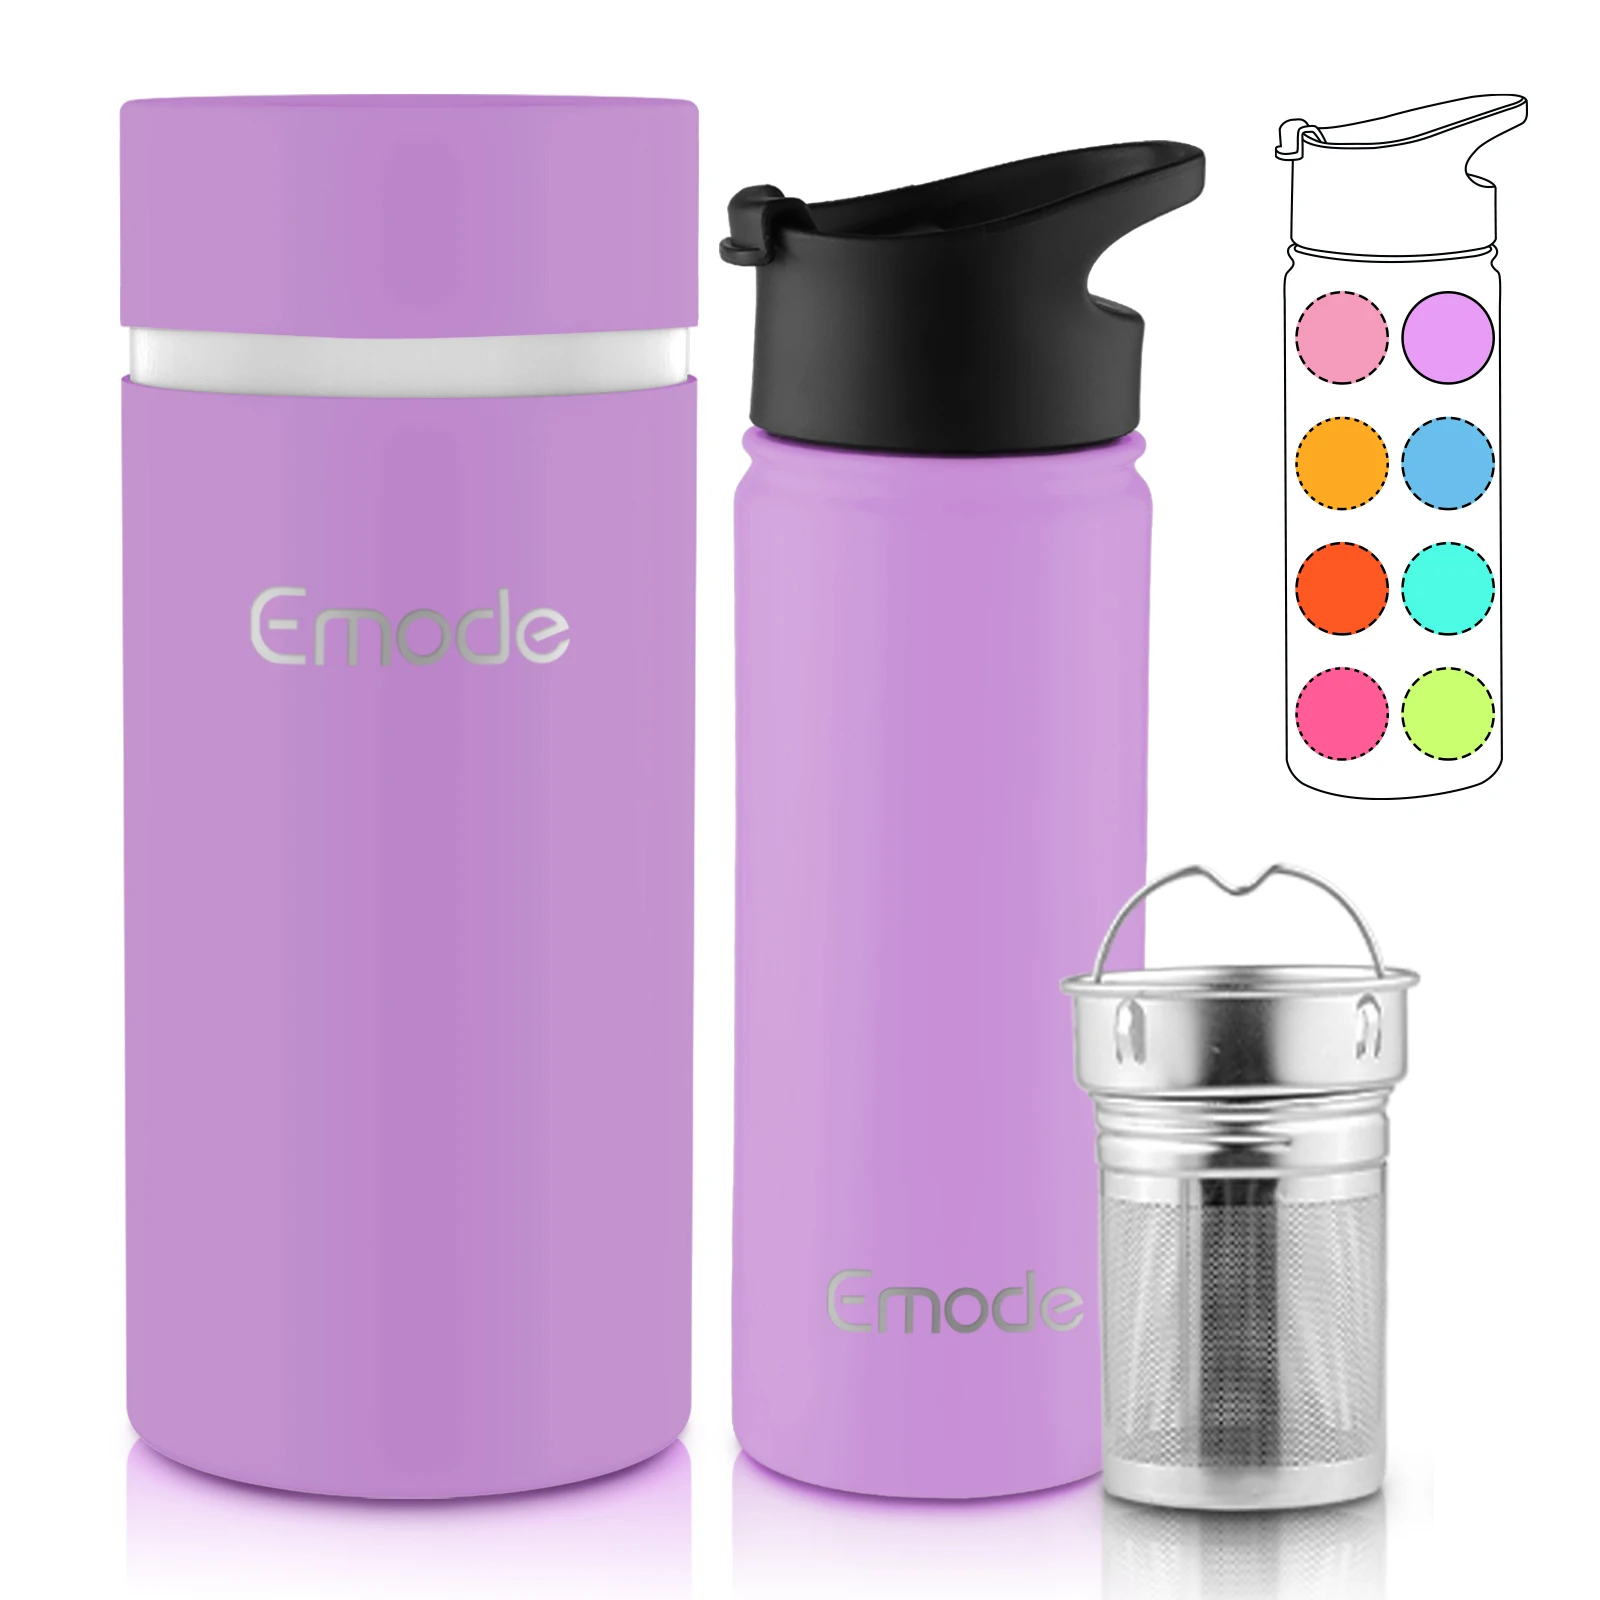 

Thermo Stainless Steel Tea Infuser Travel Mug Insulated Coffee Mug with Strainer Tea Tumbler Infuser Bottle for Loose Leaf Tea